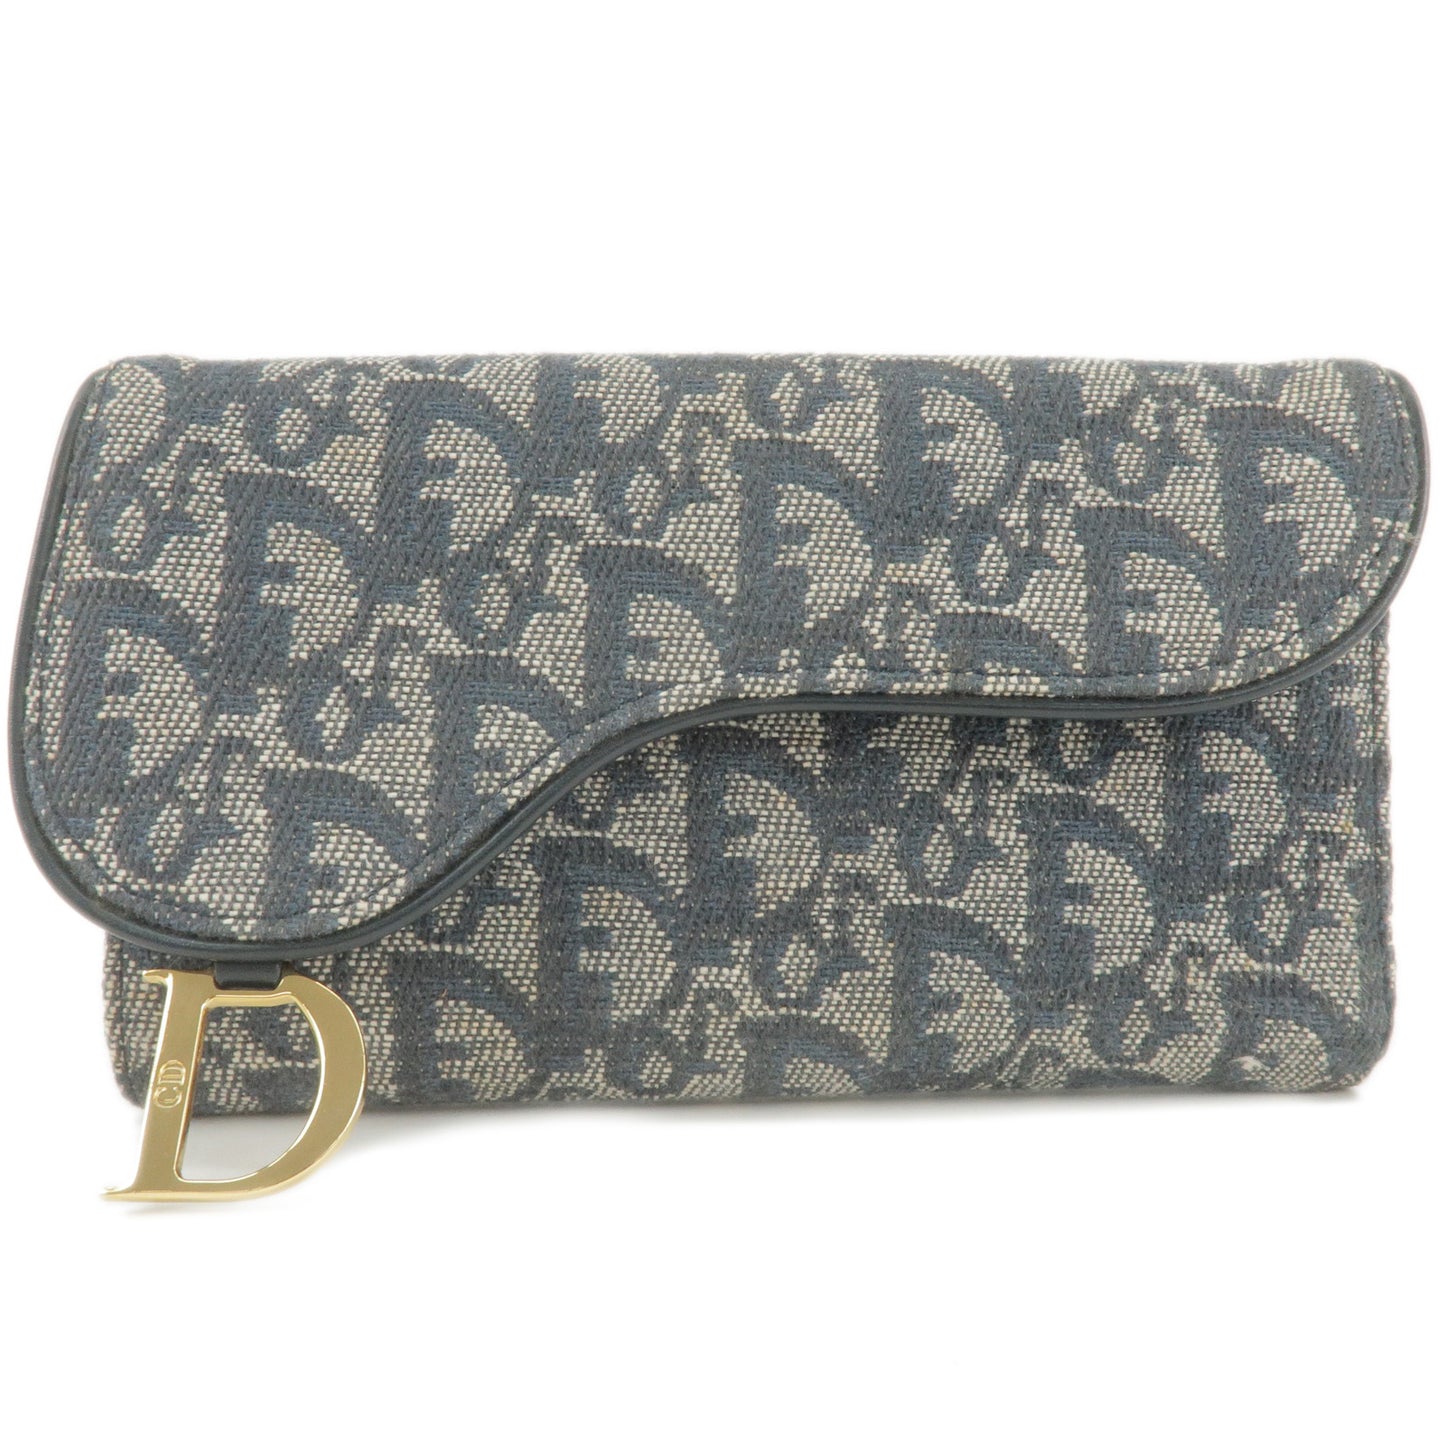 Christian-Dior-Trotter-Canvas-Leather-Saddle-Tri-Fold-Wallet-Navy